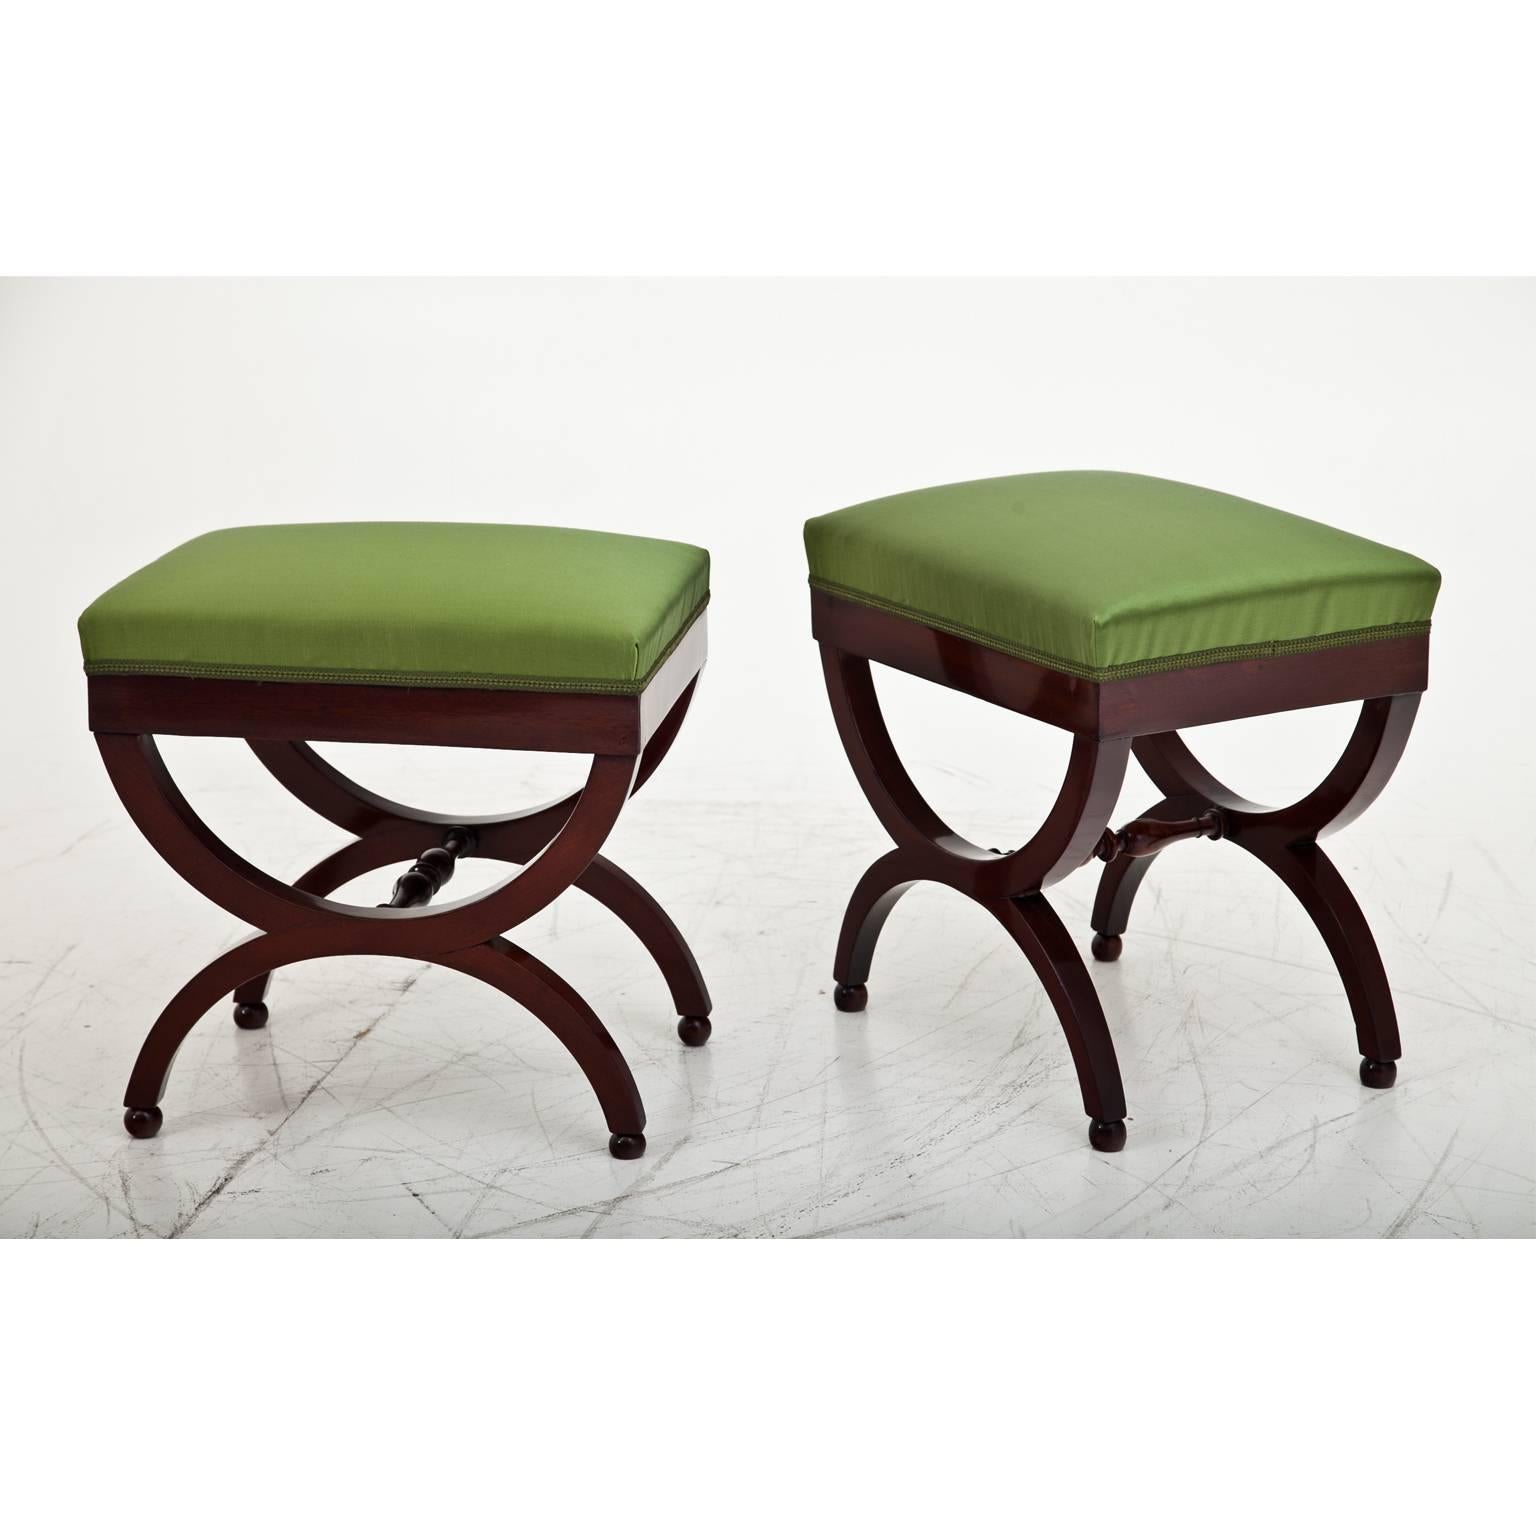 French Charles X Stools, France, 1st Half 19th Century